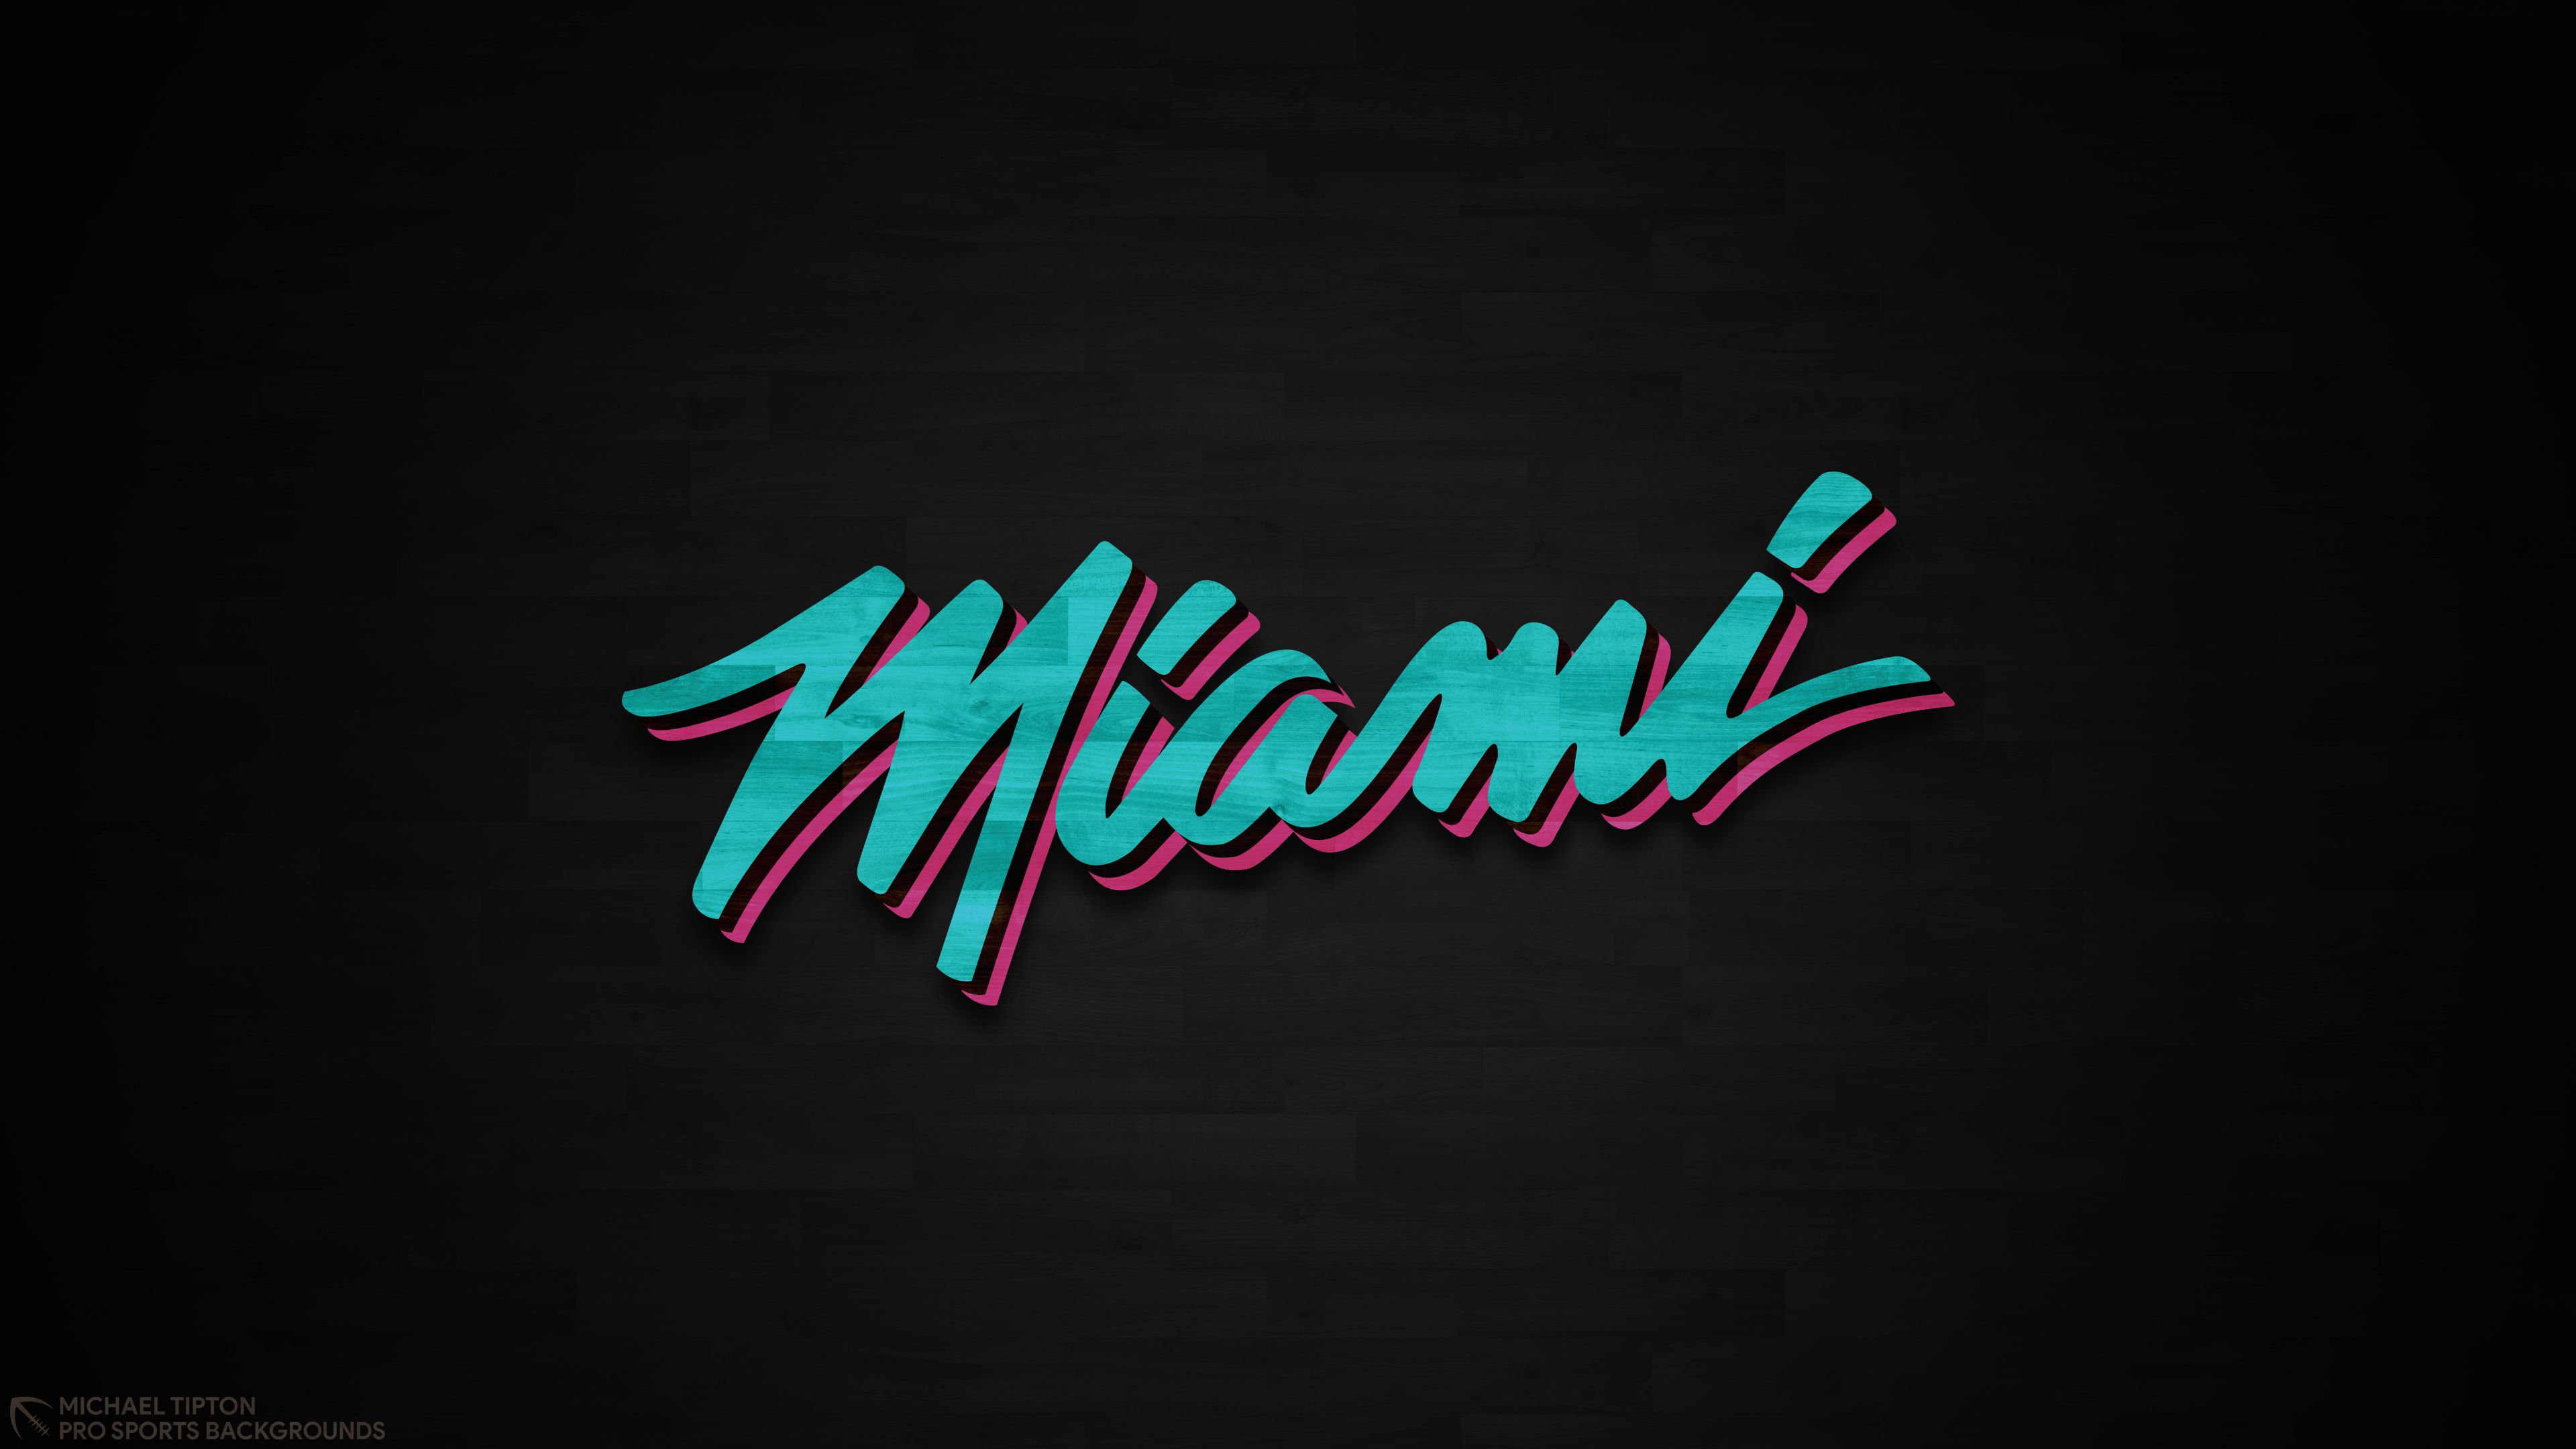 nba, sports, miami heat, basketball, crest, emblem, logo for android